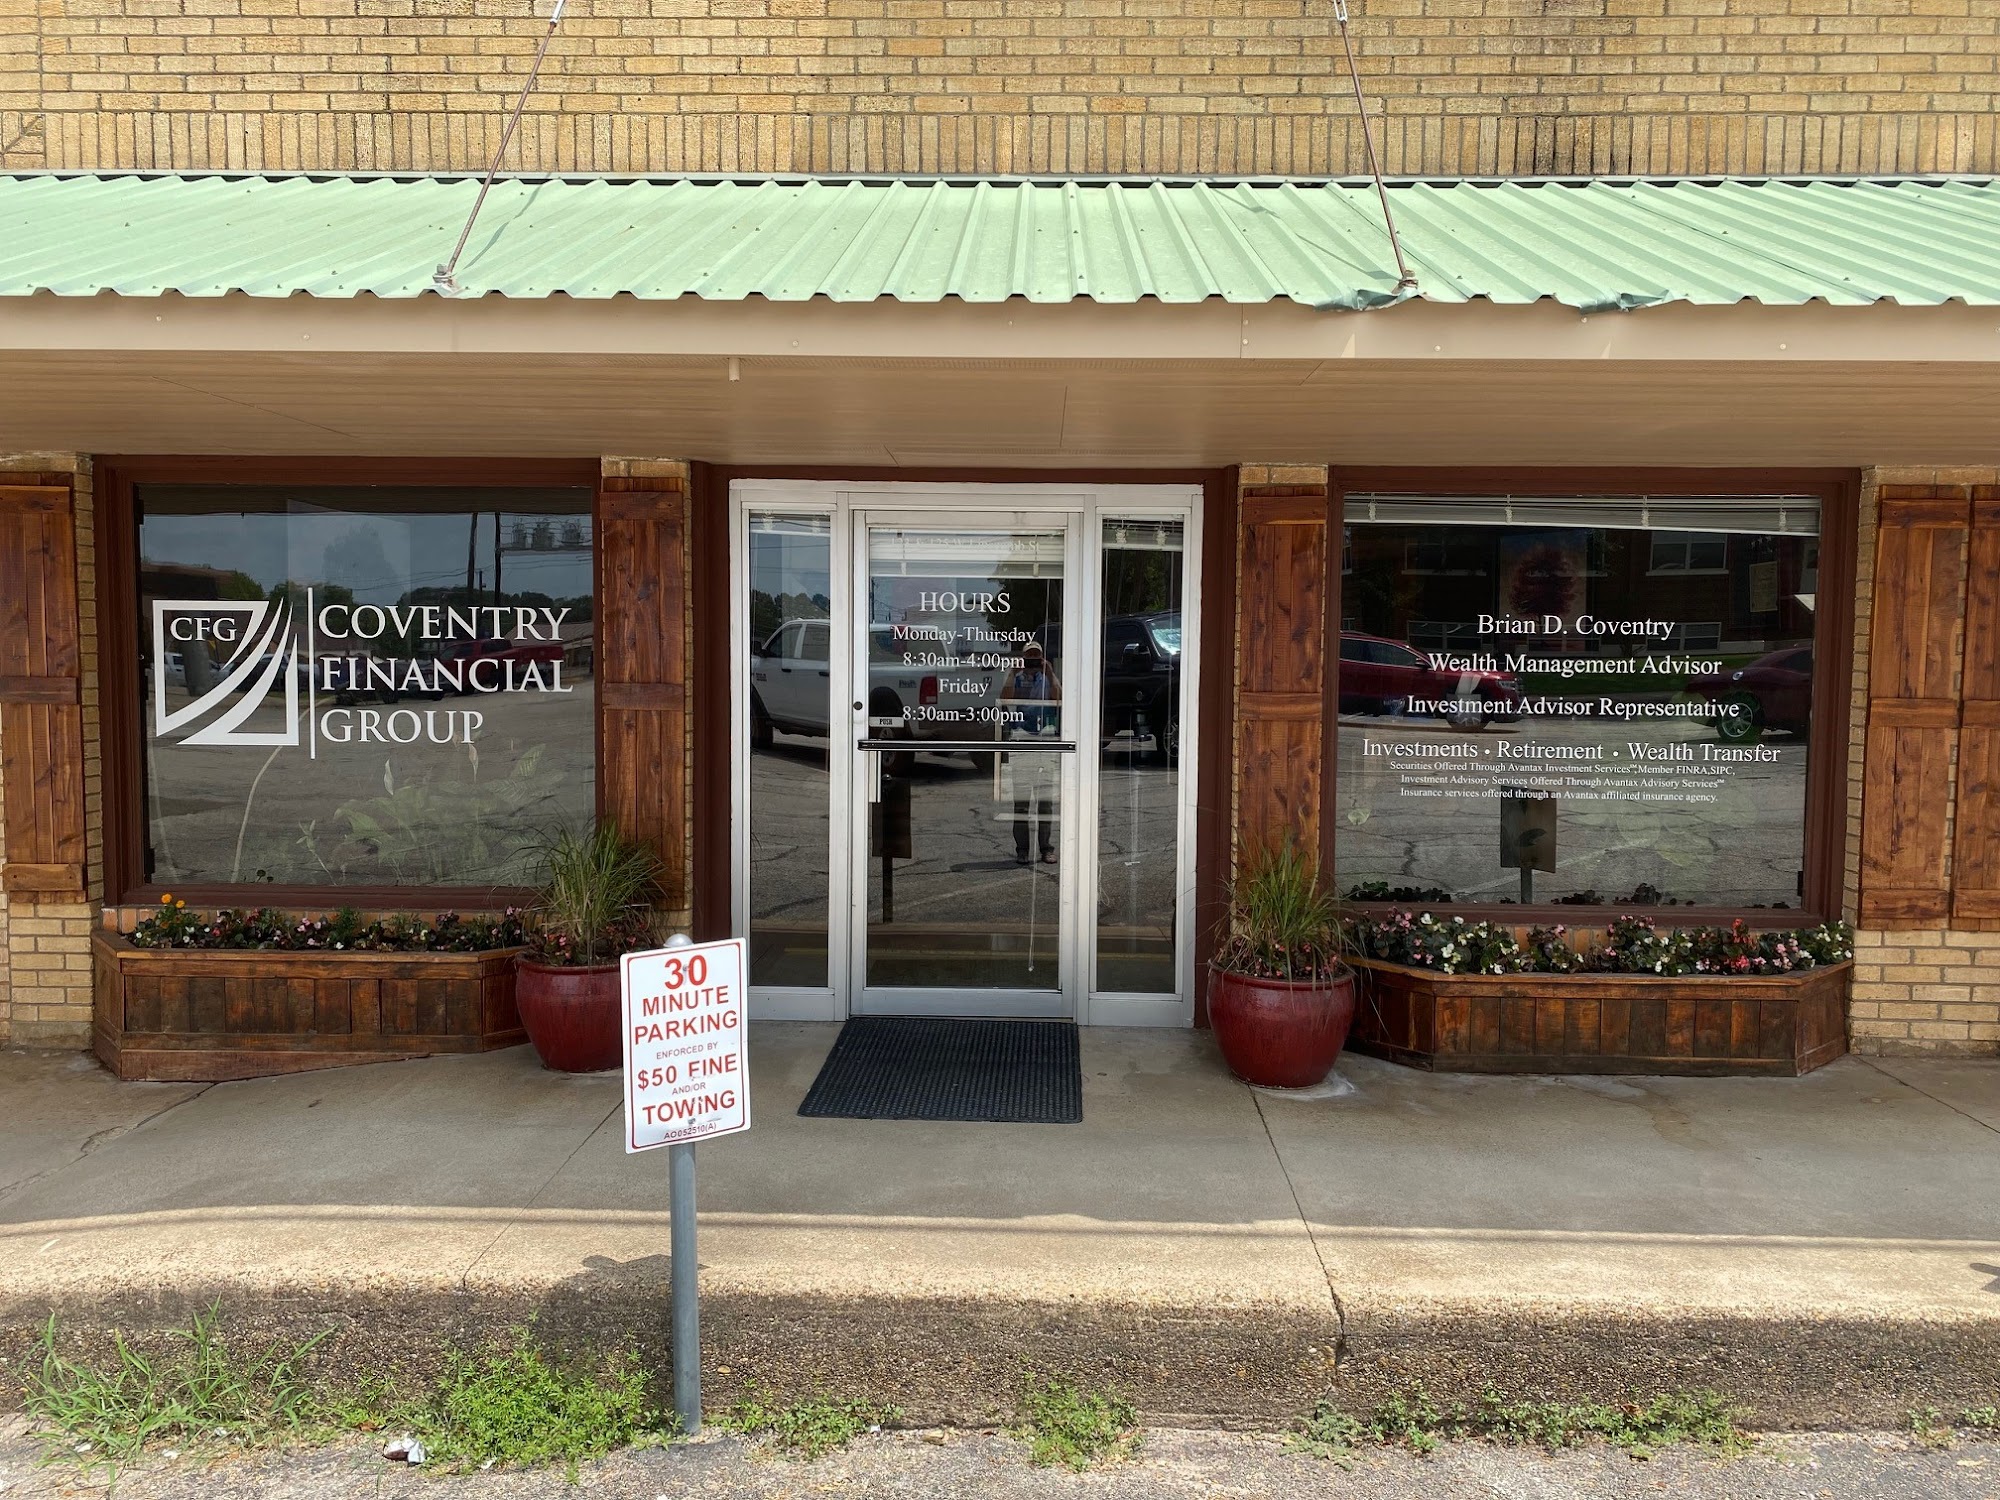 Coventry Financial Group 125 W Lipscomb St, Quitman Texas 75783